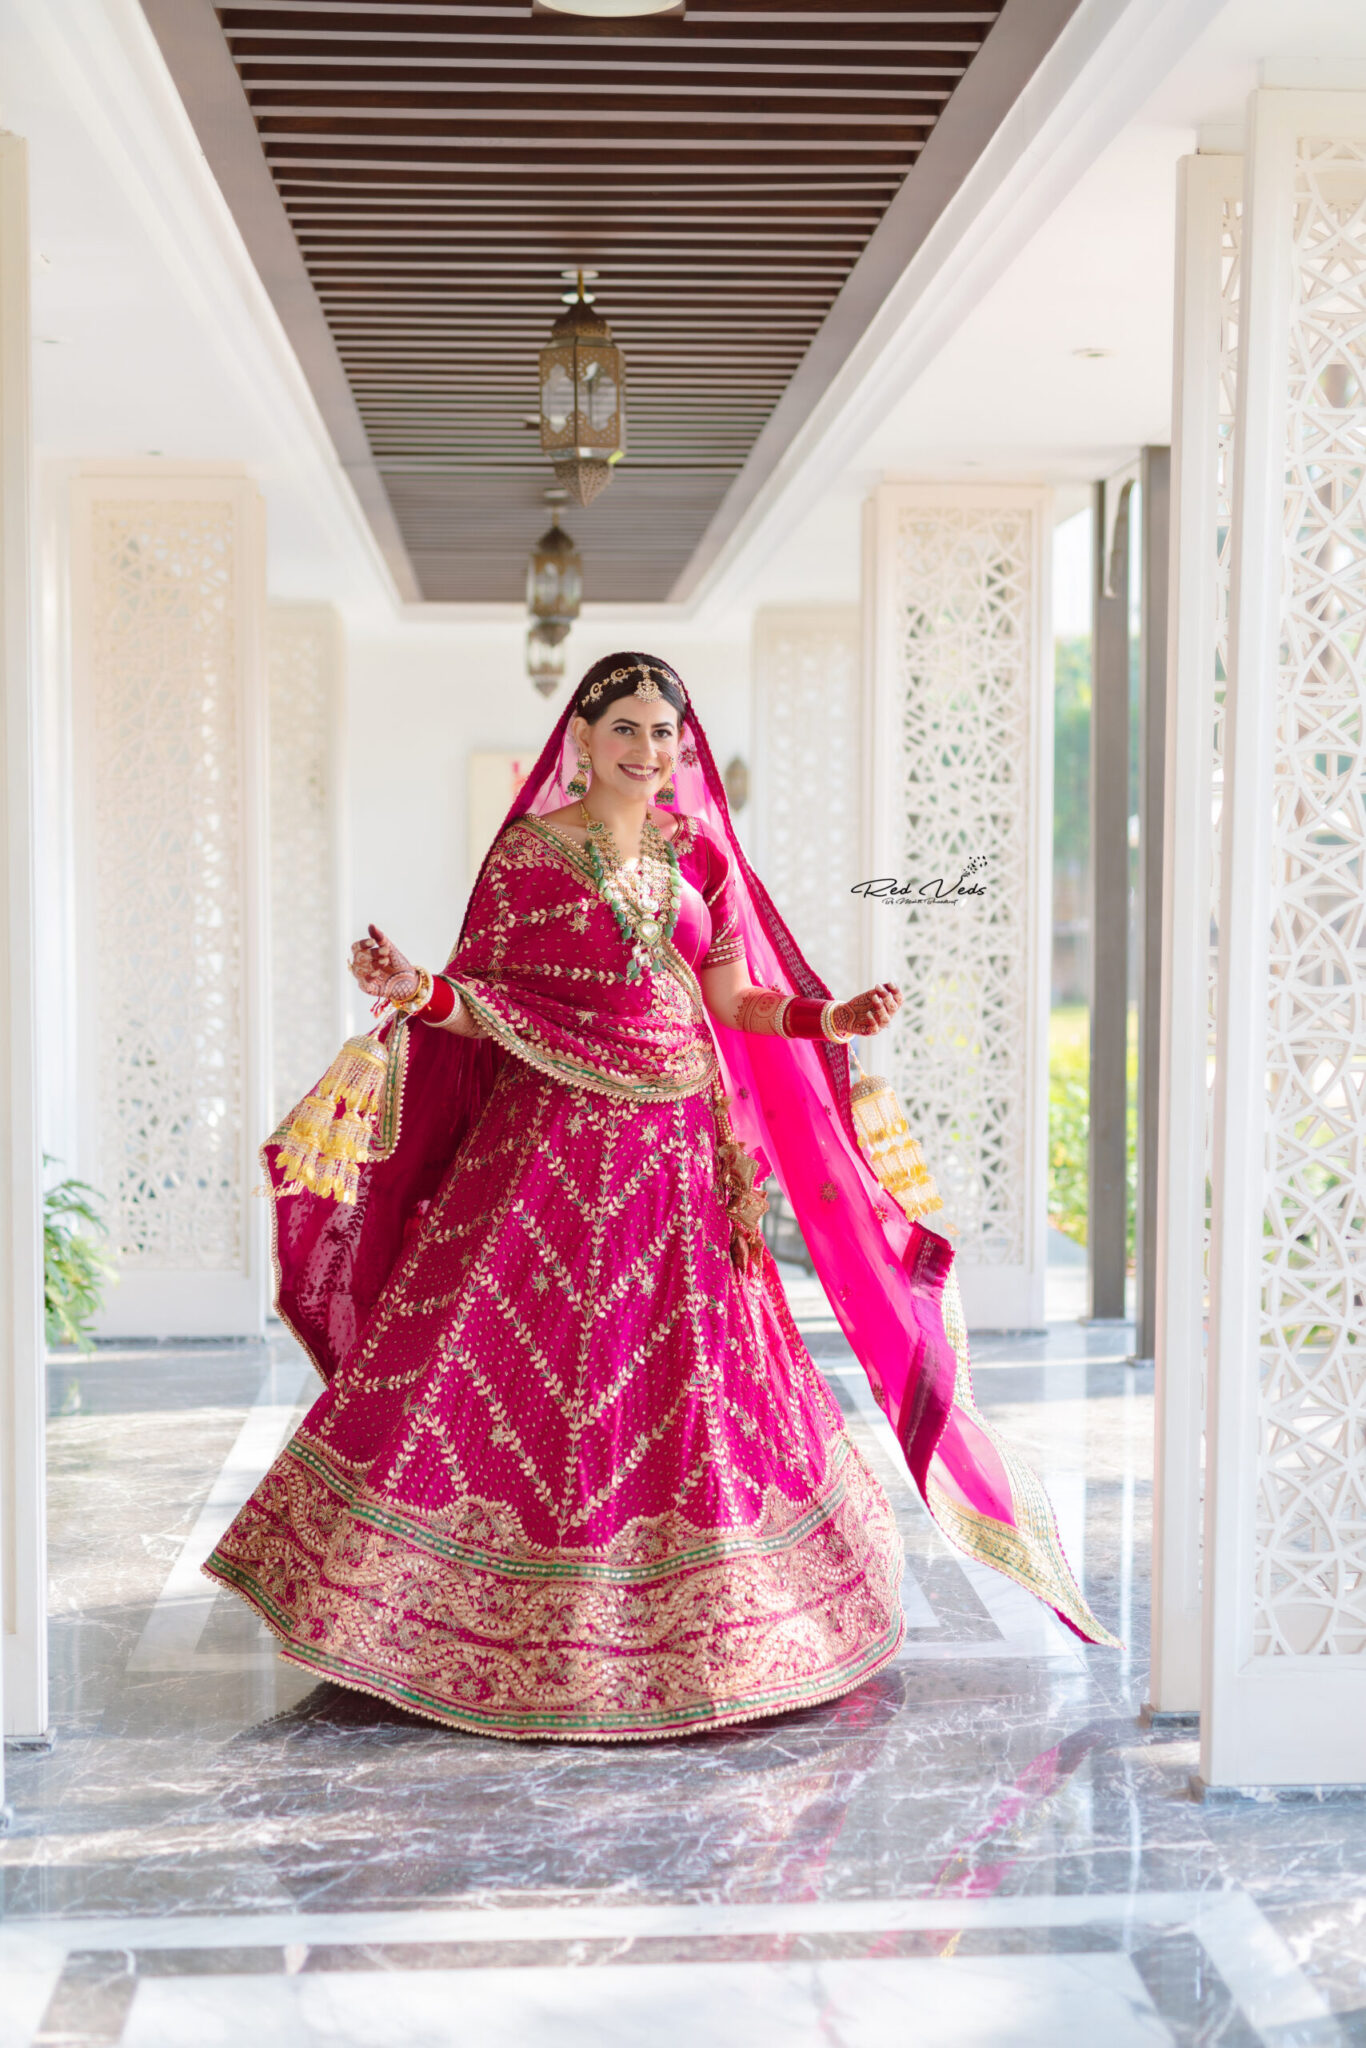 Posing Ideas For Your Muslim Wedding — The Visual Artistry Co.